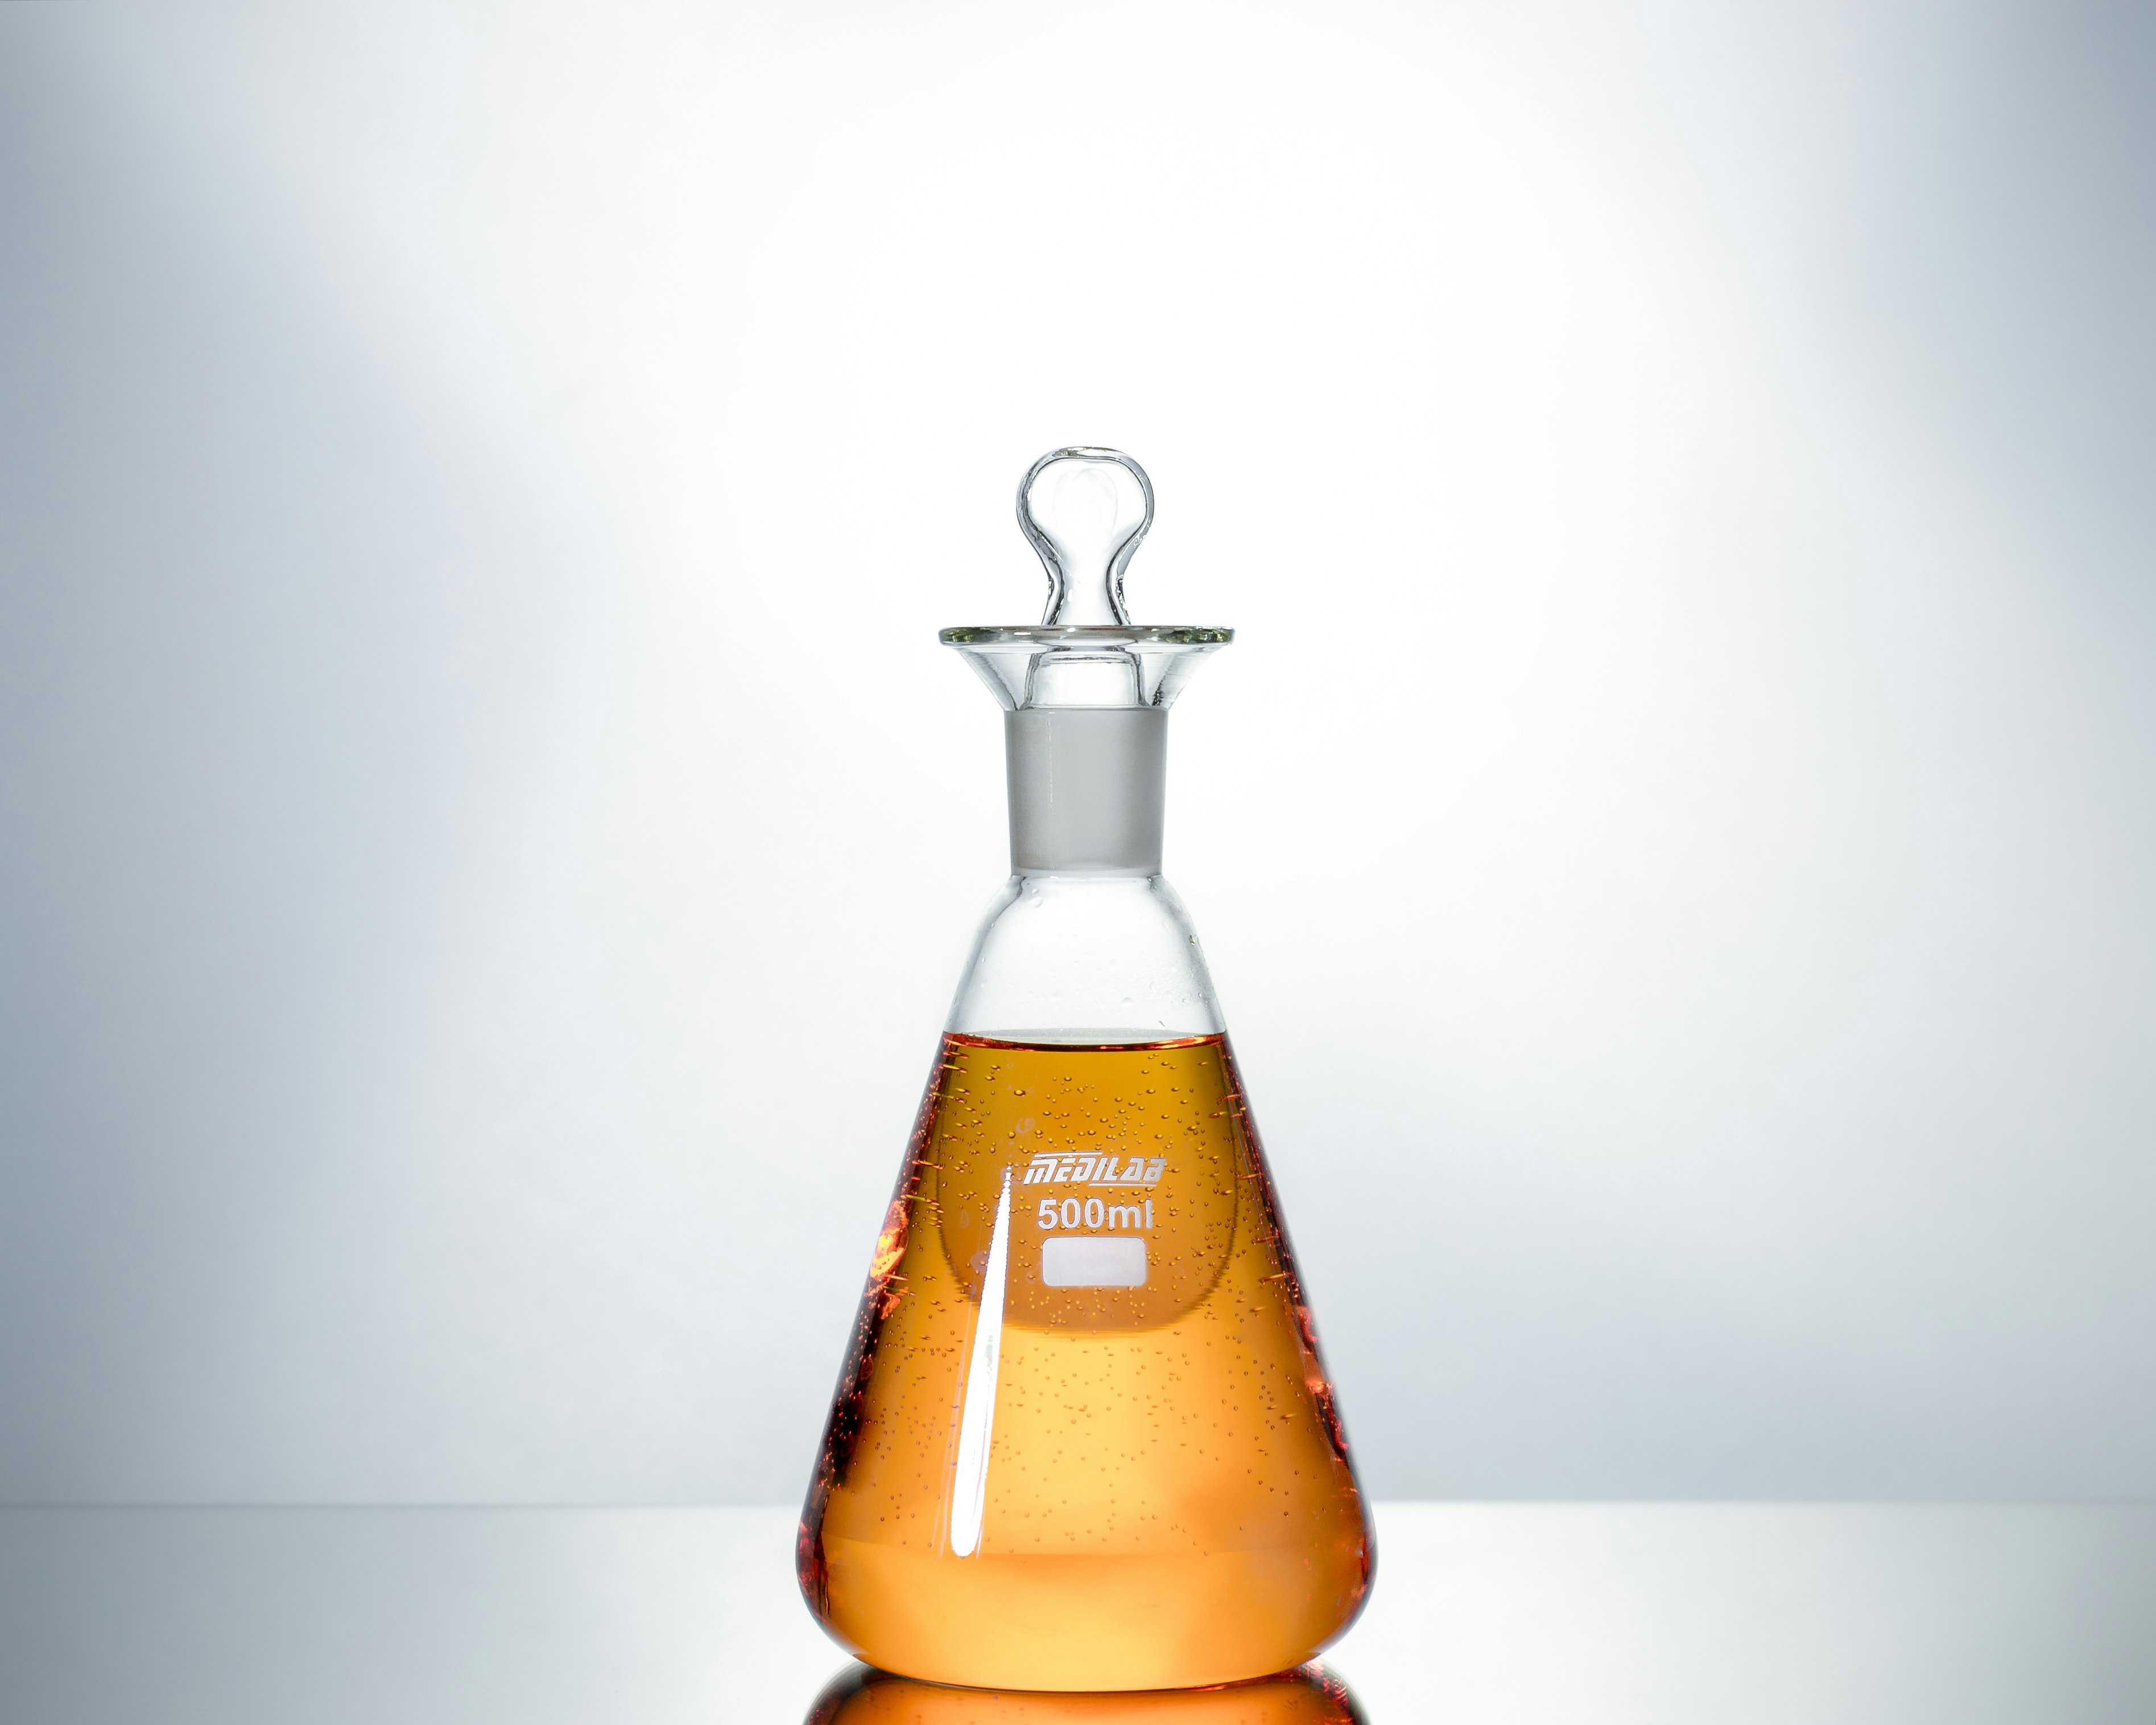 Medilab Conical Flasks Product Photography